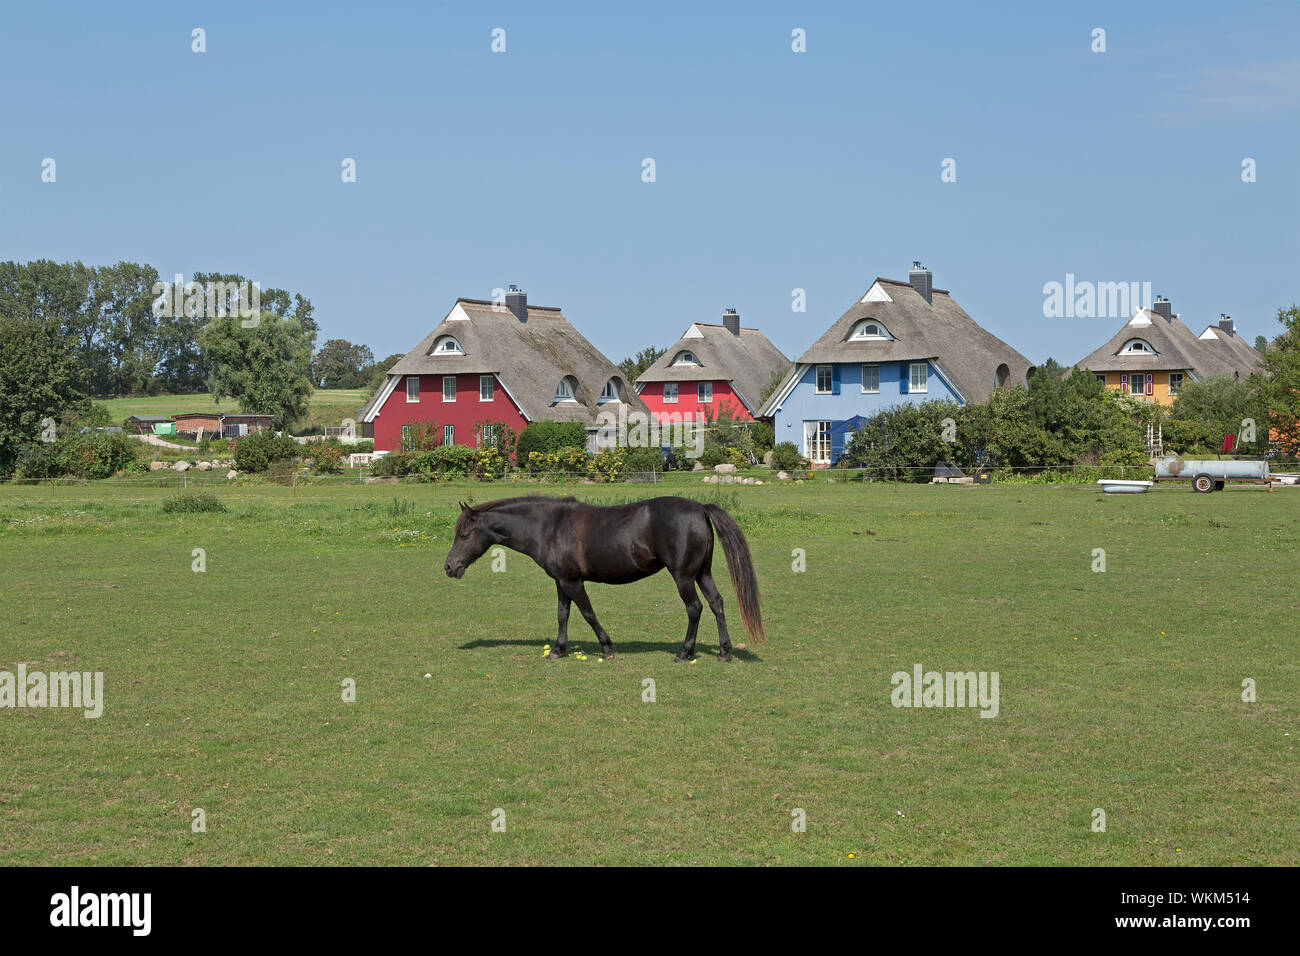 pony and thatched houses, Ahrenshoop, Mecklenburg-West Pomerania, Germany Stock Photo